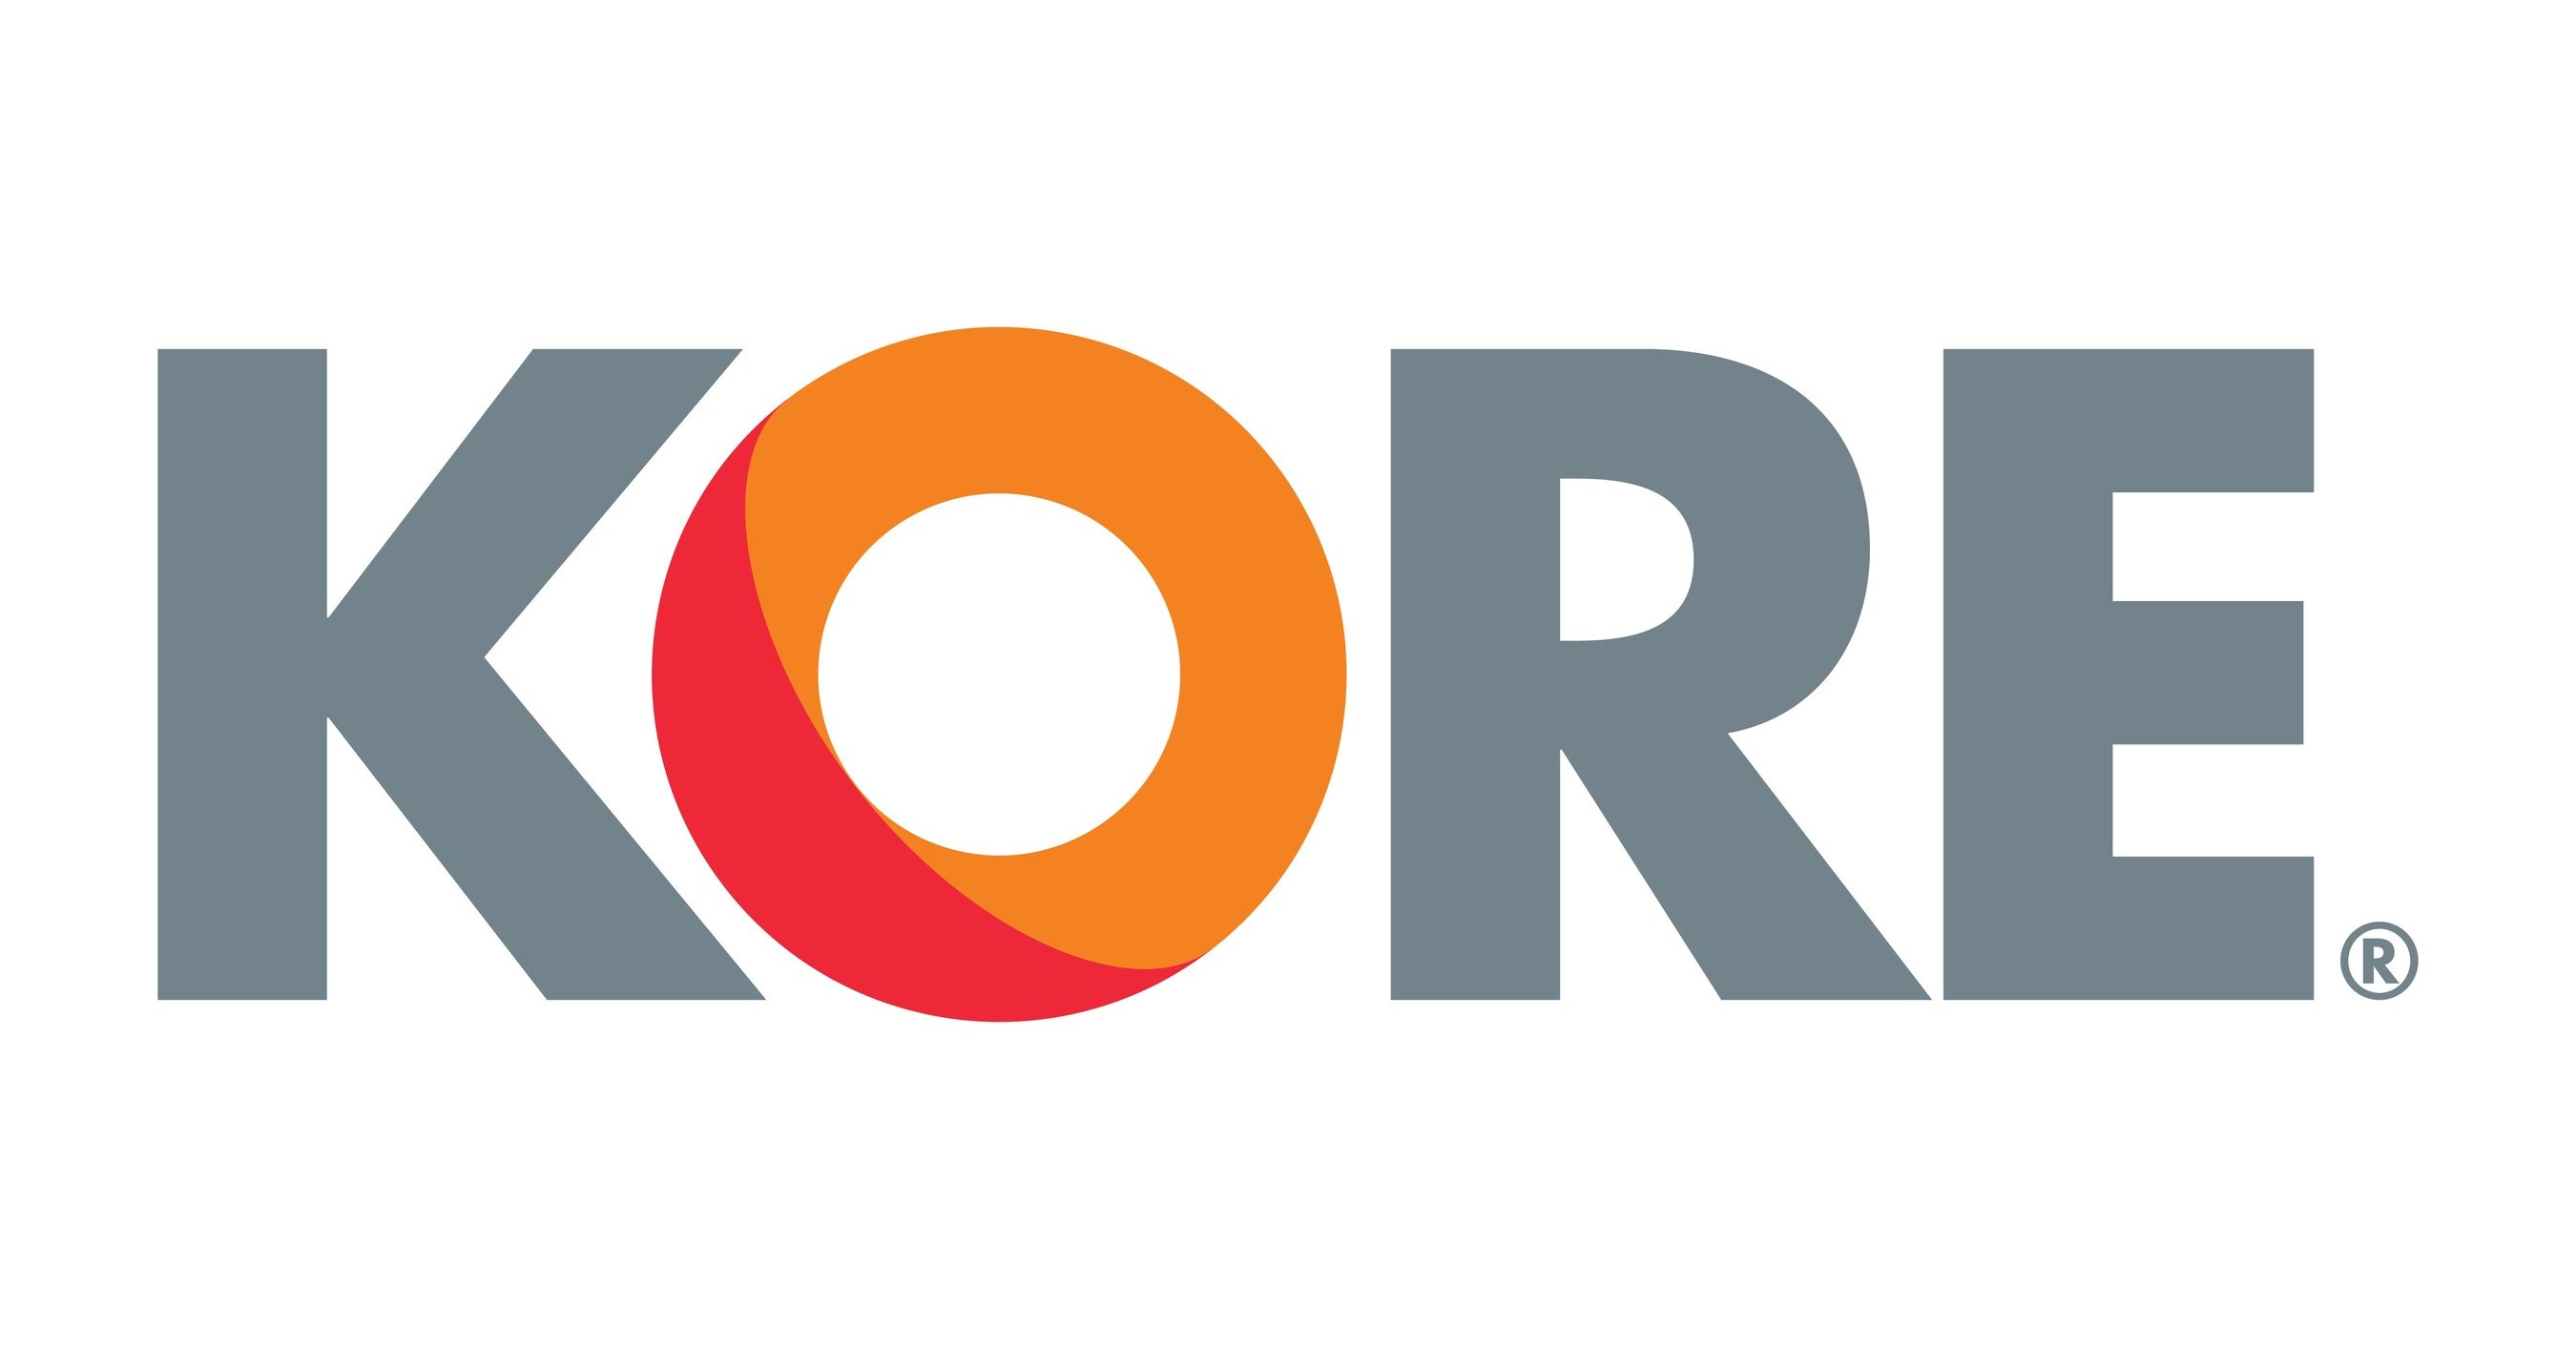 Water Sustainability and Efficiency Technology Supported by KORE - PR Newswire